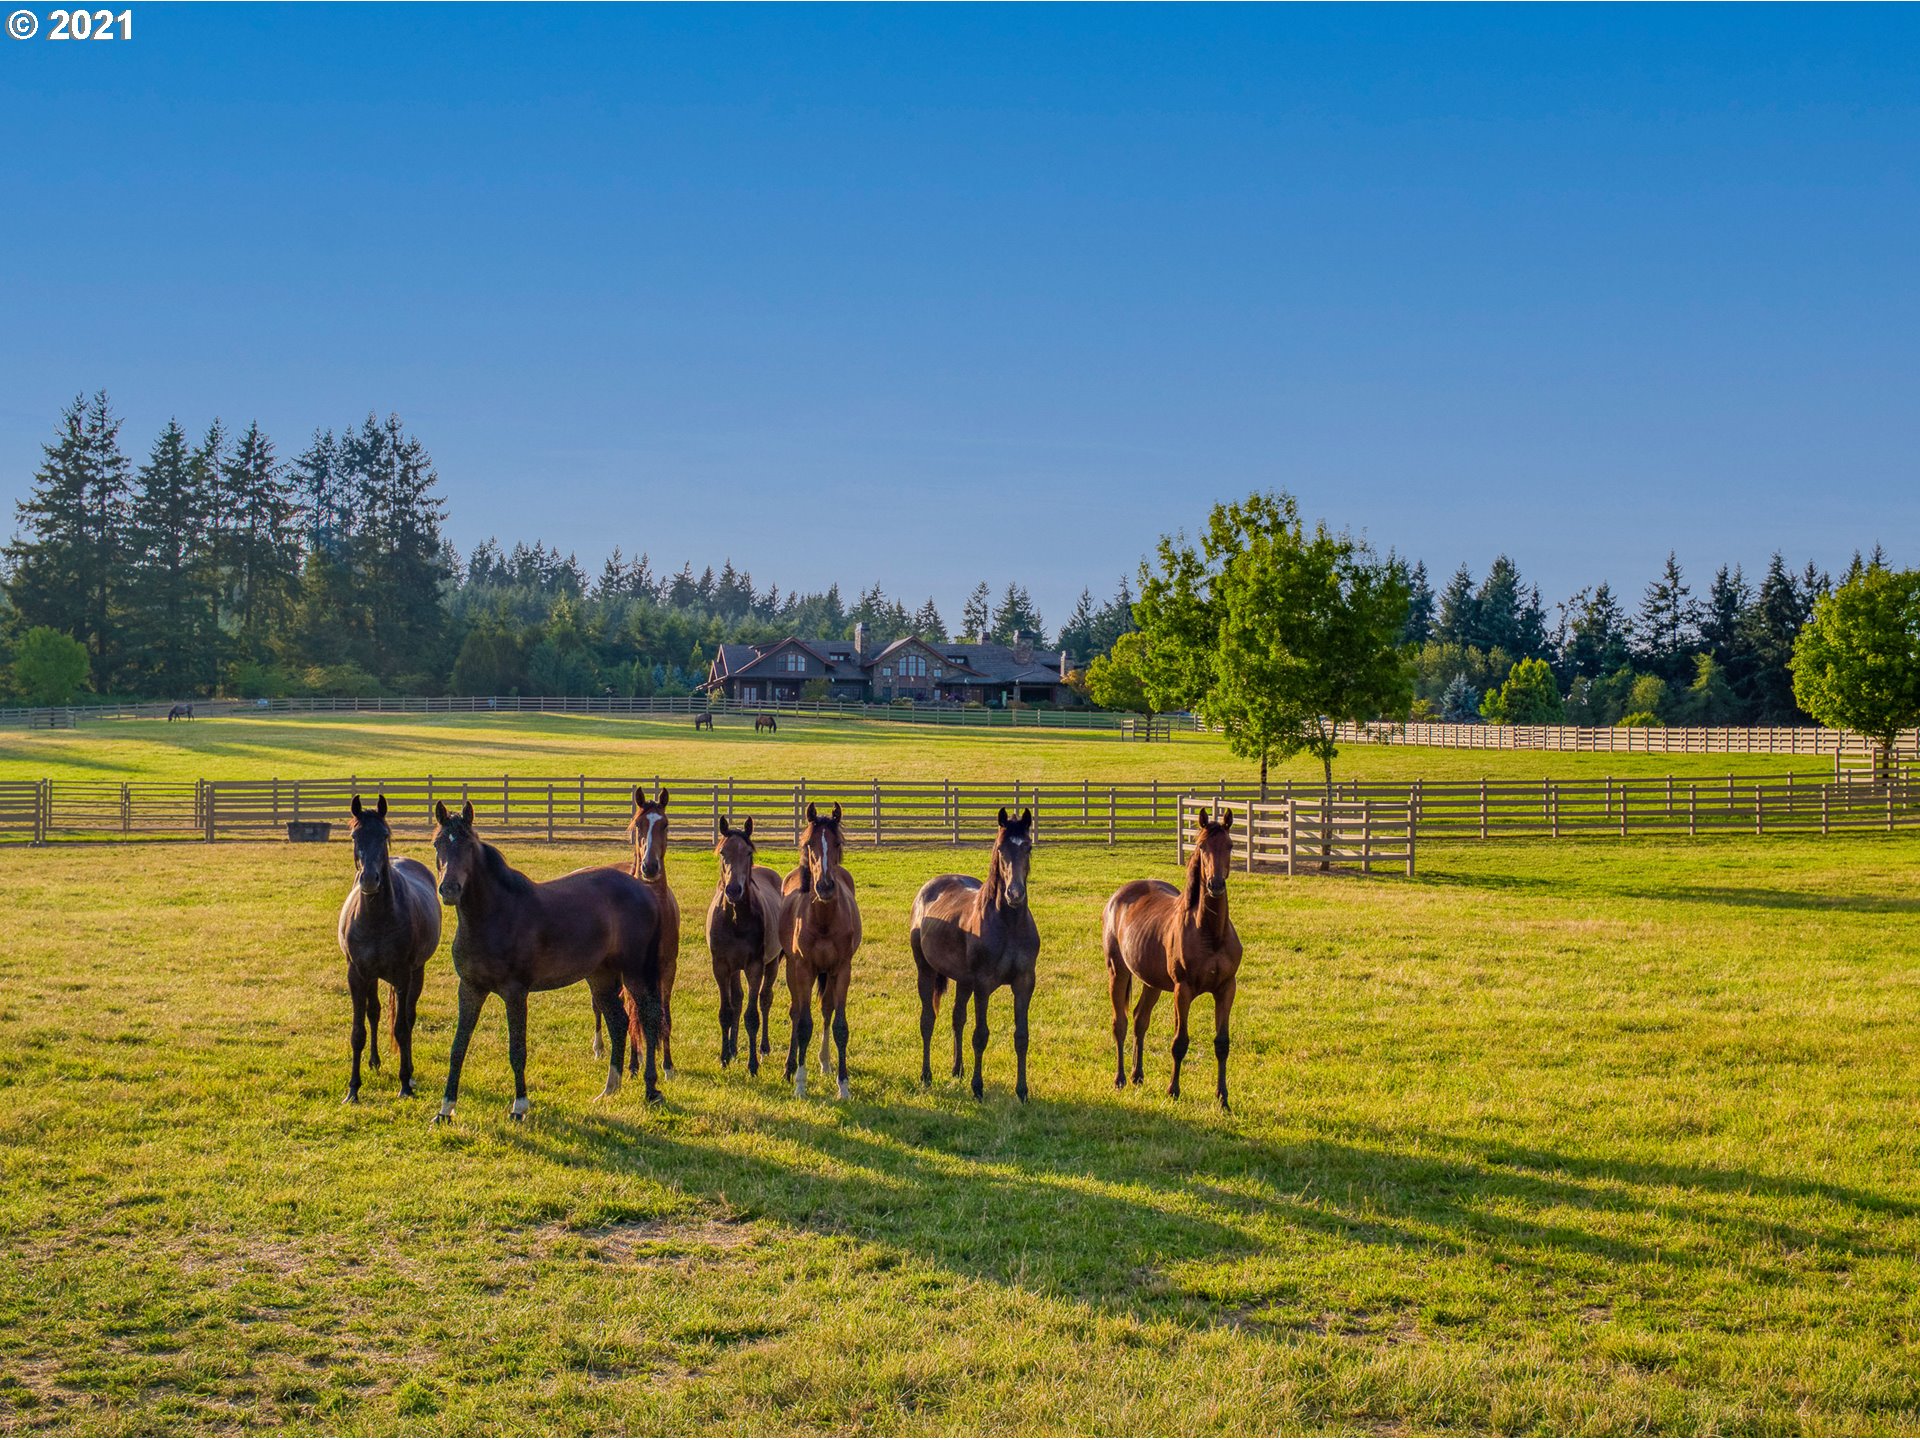 World-class 176ac equine breeding and training facility w/stunning 9,855sf owner's residence. State-of-the-art facilities w/indr and outdr arenas, pastures, 4 barns, 80+ stalls w/attached runs, vet lab, farrier rms and wash racks. Main res has infinity pool, outdoor living, grmt kit, add'l detach garage w/priv office plus add'l homes for staff. Fenced and gated. Exceptional equestrian lifestyle opportunity! Subj to partition.